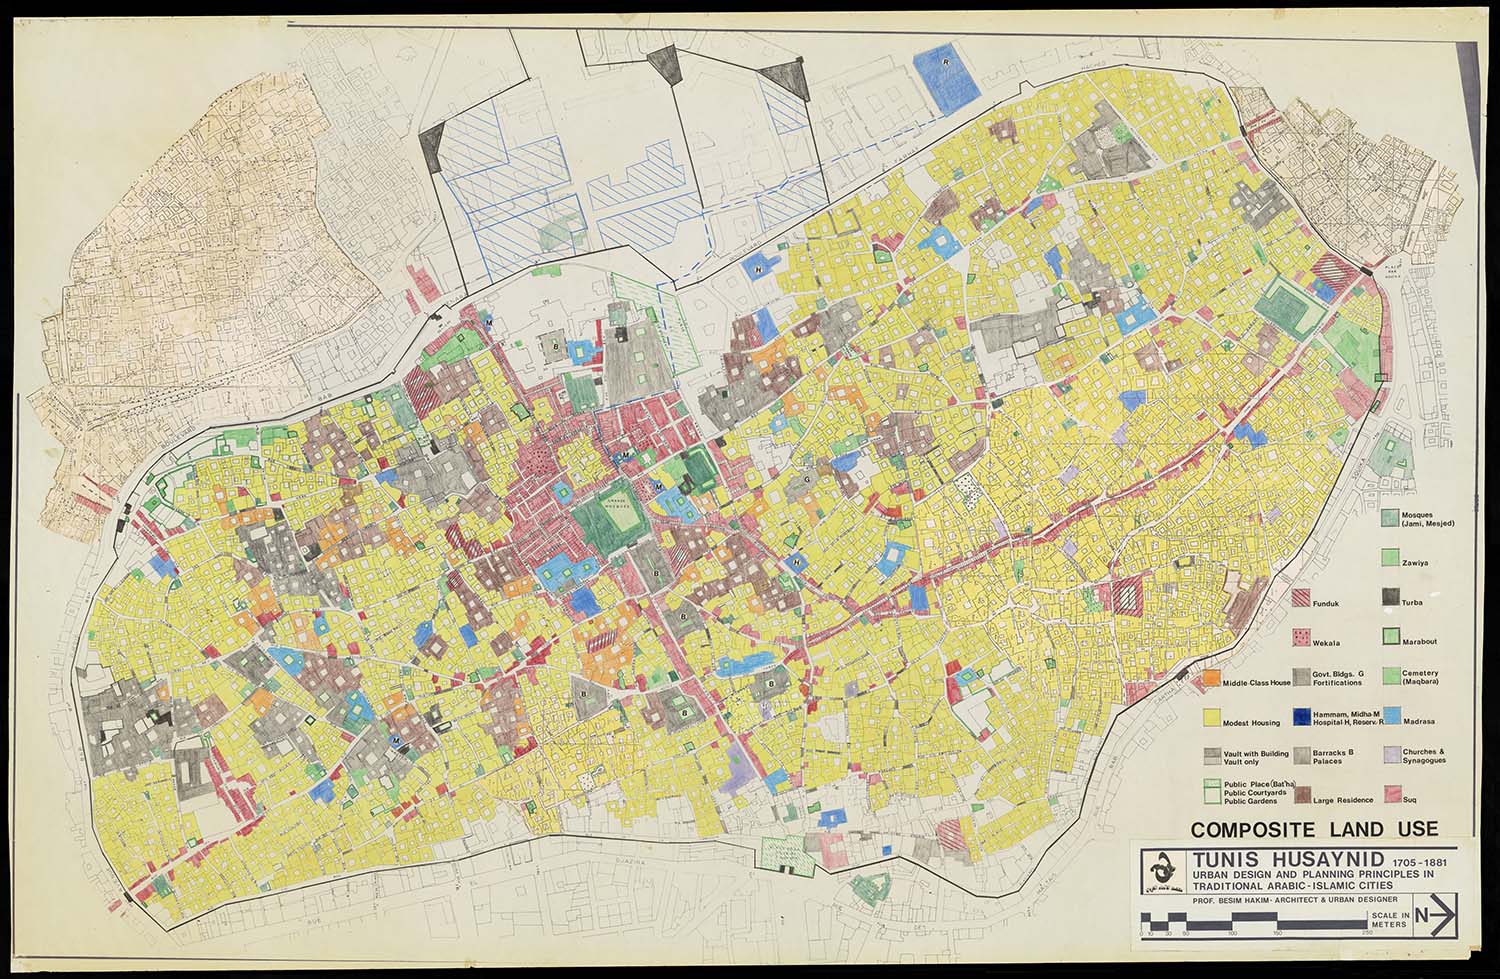 Tunis  - Map of historic center of Tunis dating to the&nbsp;Husaynid period showing land use. Land use is color coded according to key provided at bottom right. Scale: 1:1,000 m. This map is part of a&nbsp;<a href="https://archnet.org/collections/1762" target="_blank" data-bypass="true">series of maps</a><span style="text-align: justify;">&nbsp;titled "Tunis Husaynid (1705-1881): Urban Design and Planning Principles in Traditional Arabic-Islamic Cities." Produced by Besim S. Hakim.</span>